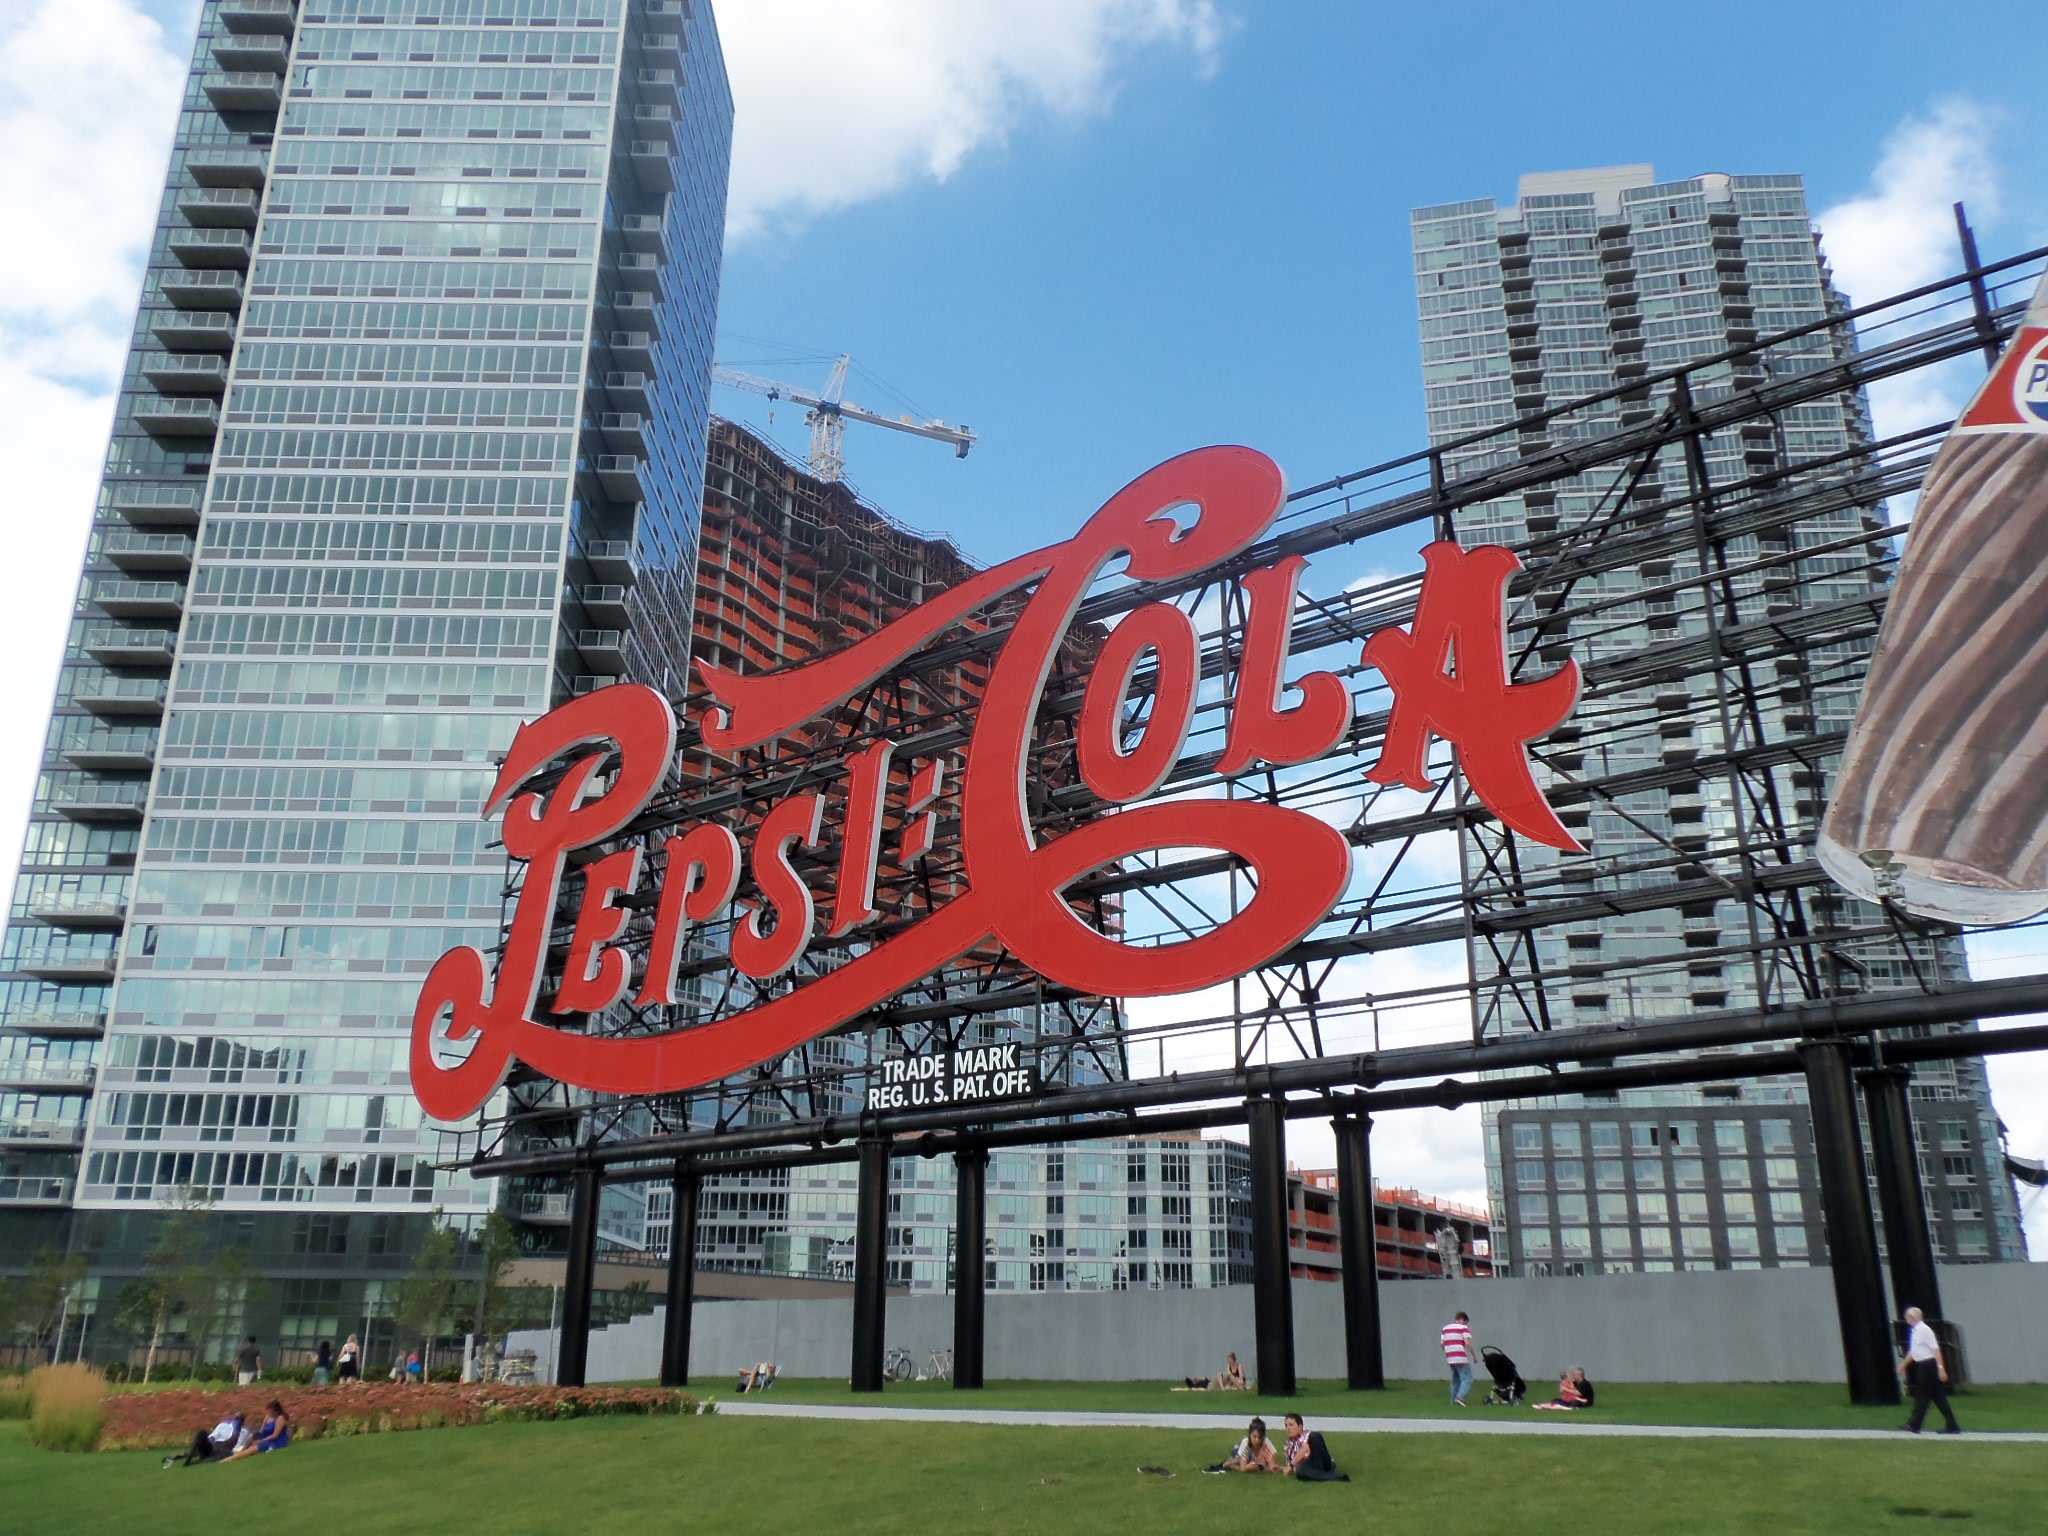 The Pepsi sign, in more tranquil times